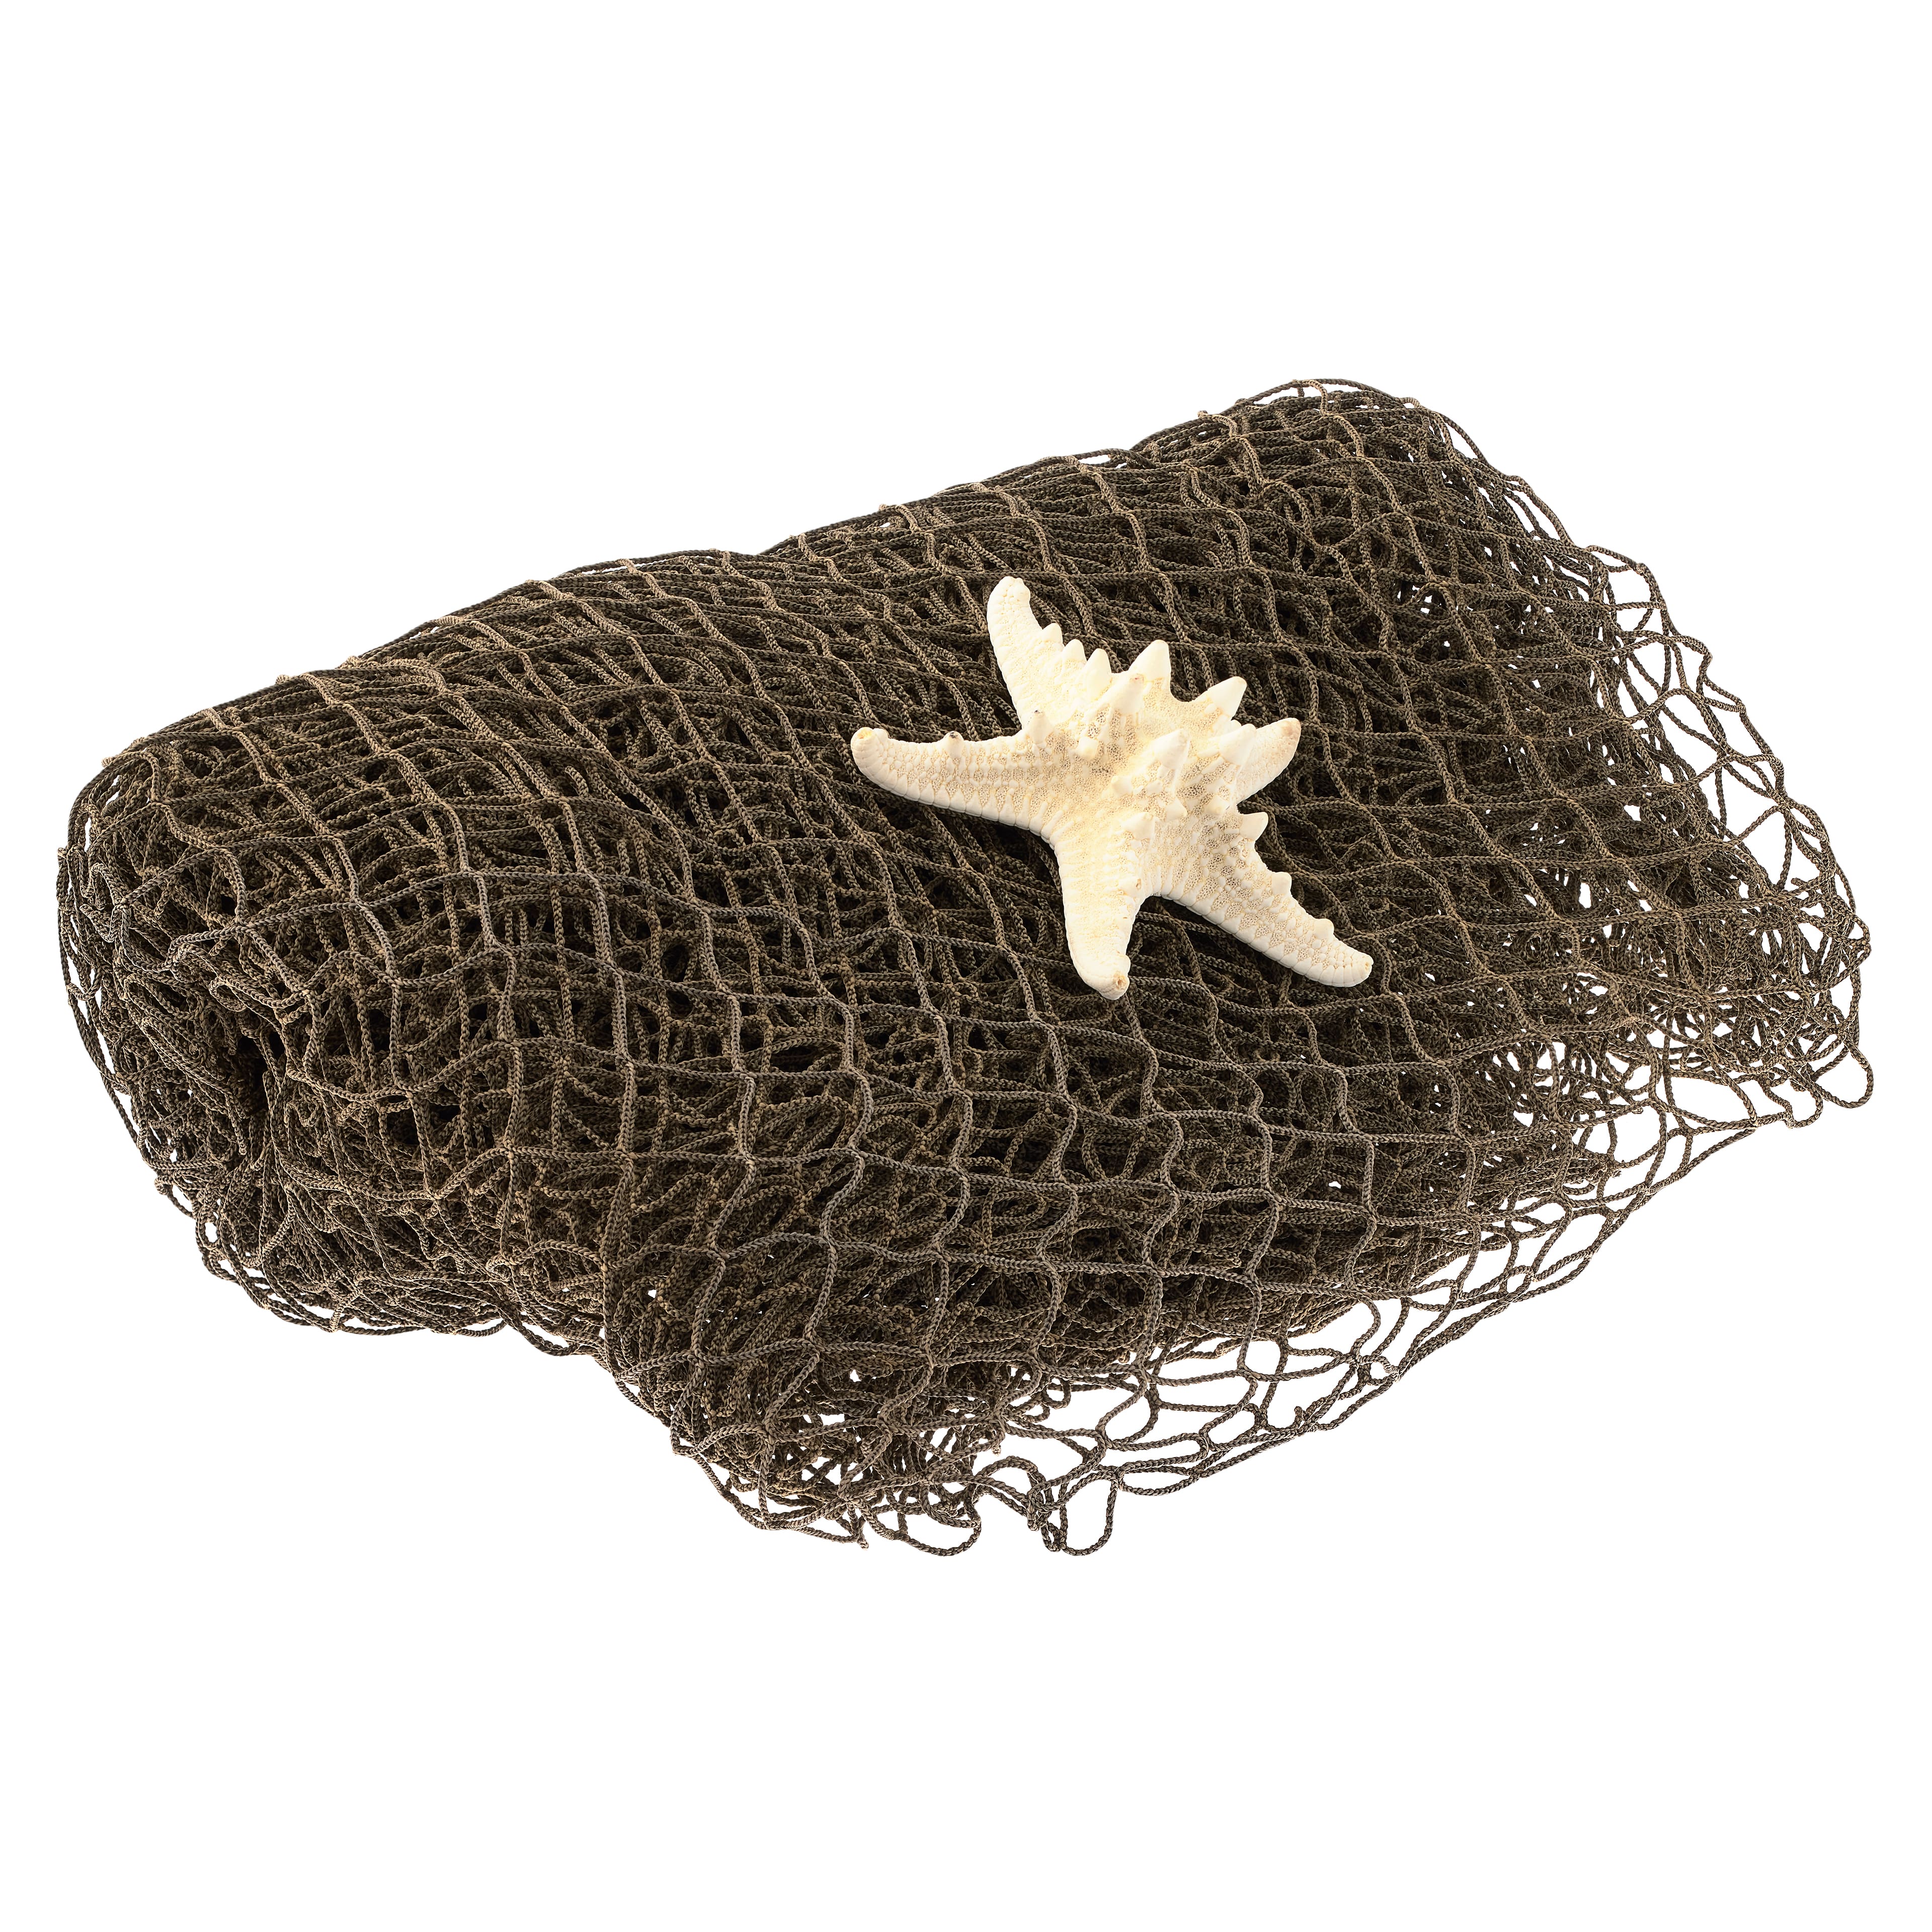 Wholesale fish net decor that Jazz Up Indoor Rooms and Spaces 